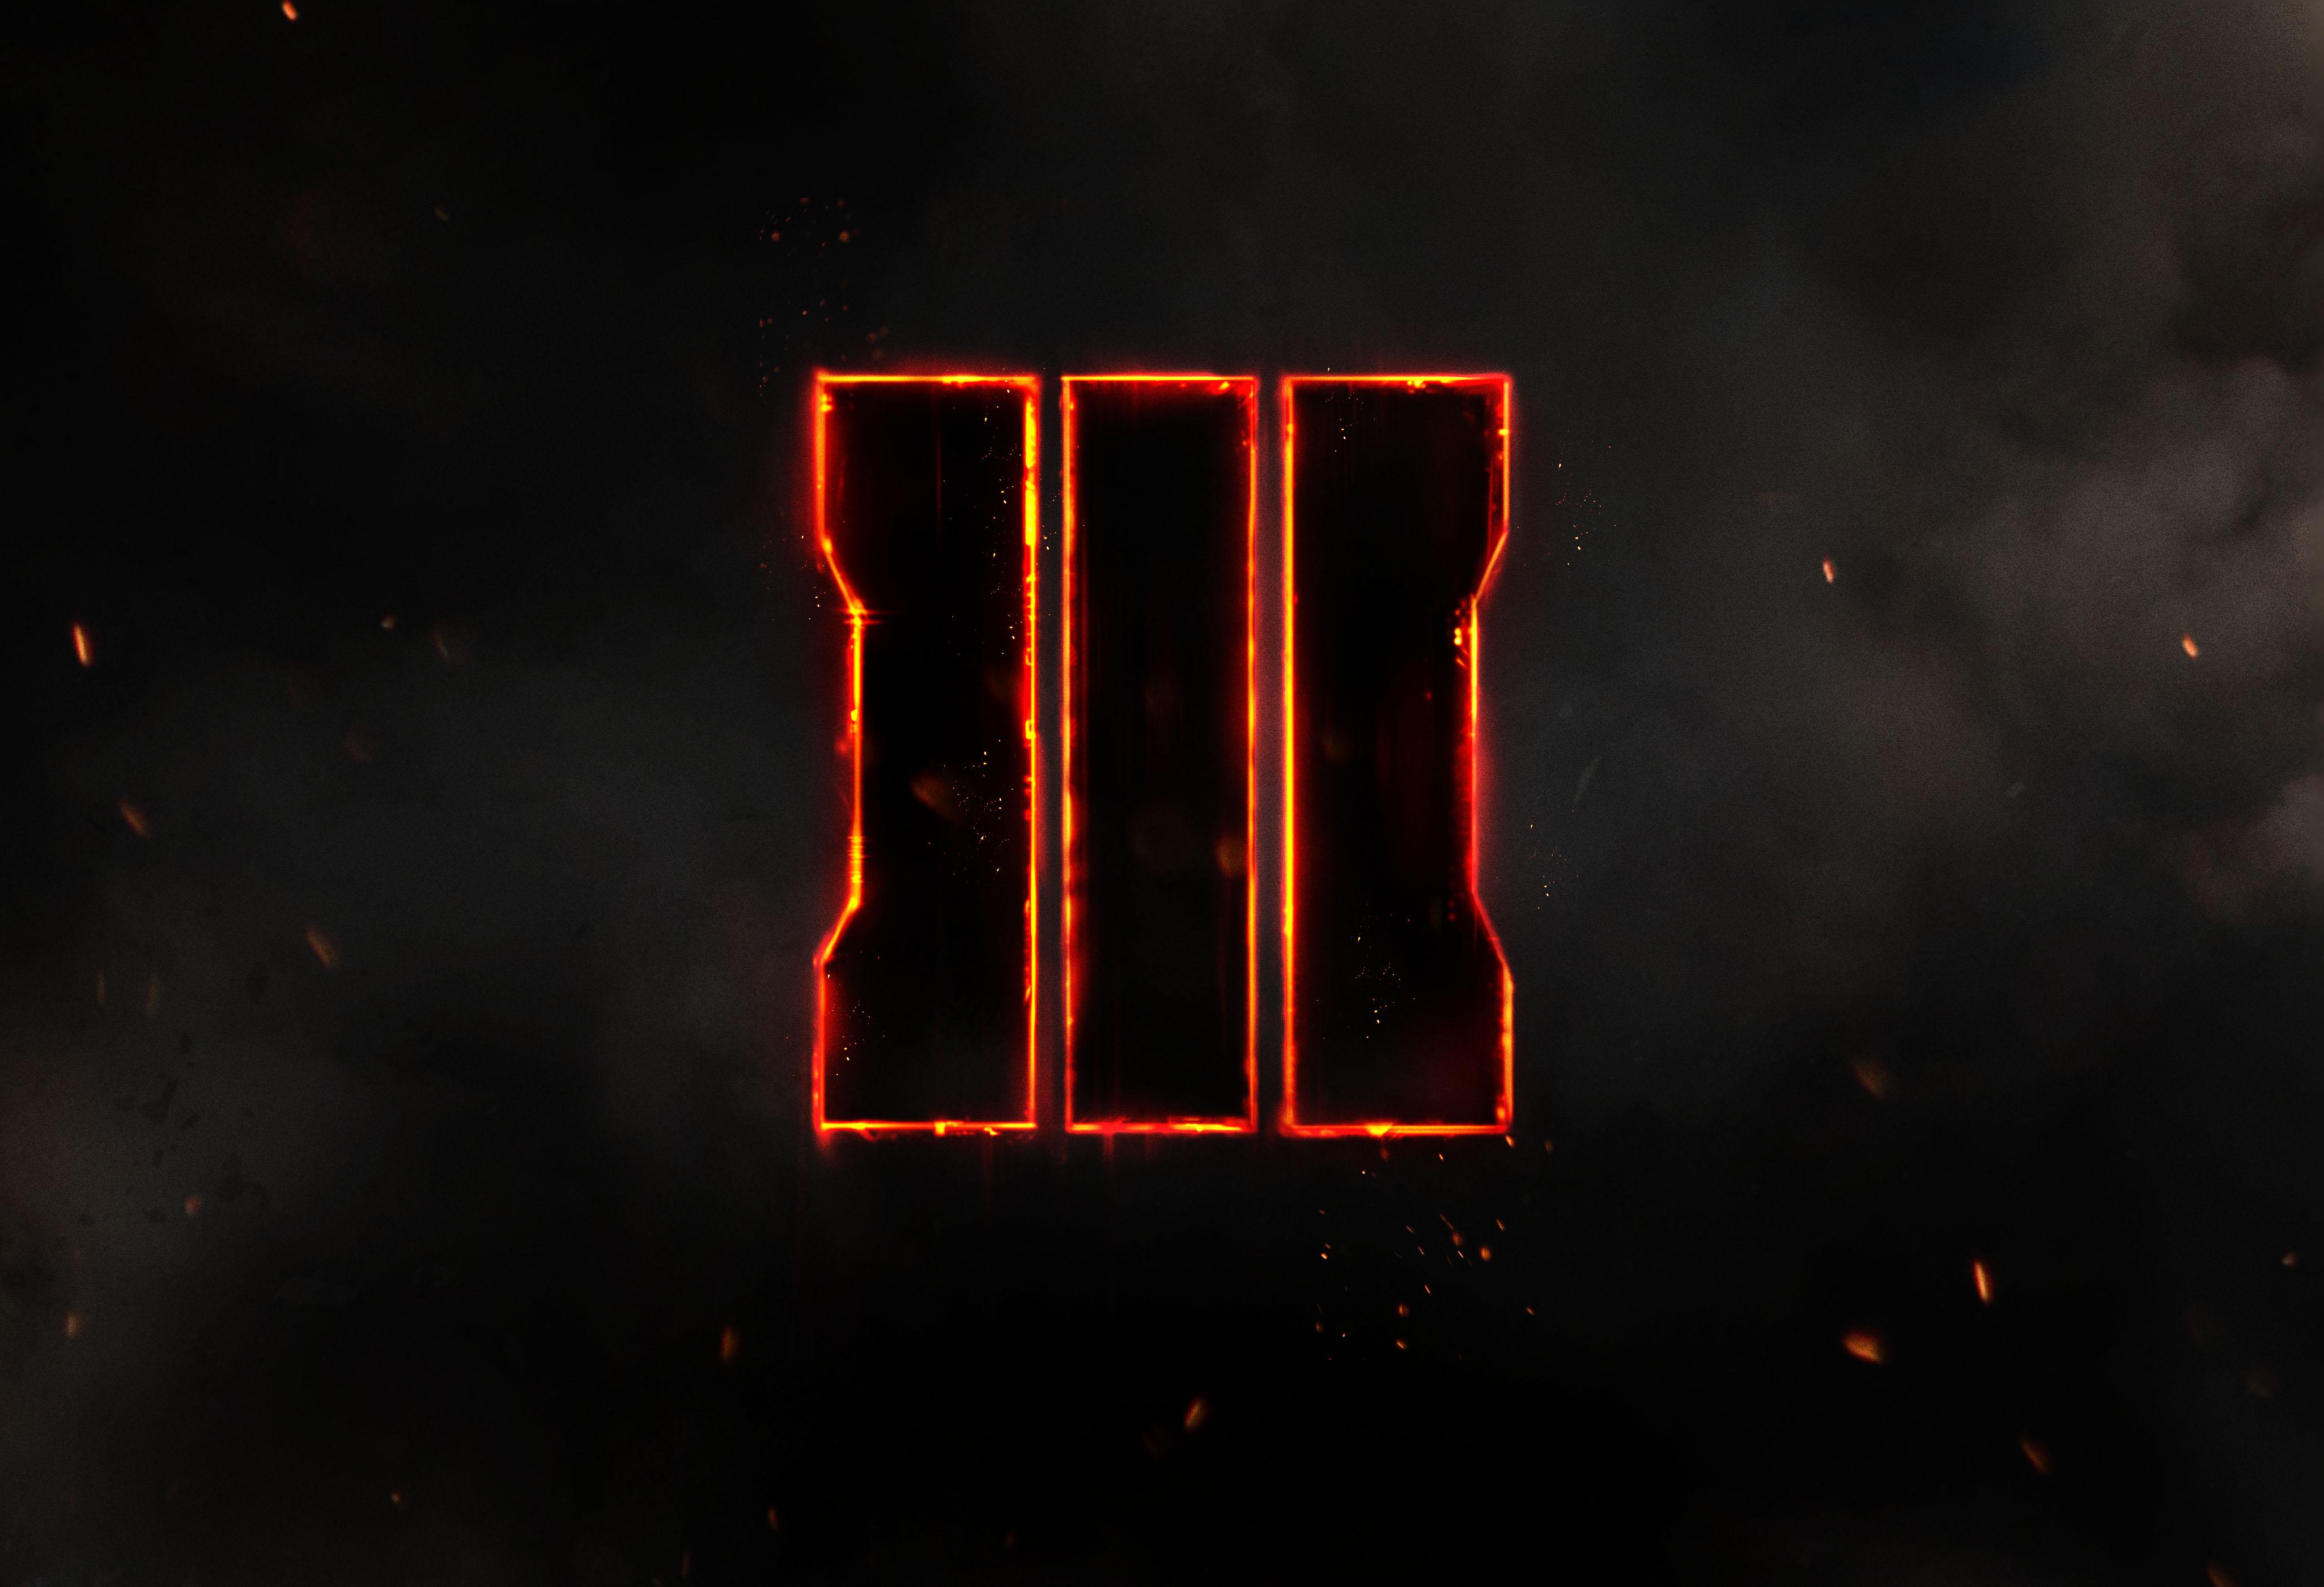 Black Ops 3 Wallpapers Images - Call Of Duty Black Ops 3 Dessin , HD Wallpaper & Backgrounds